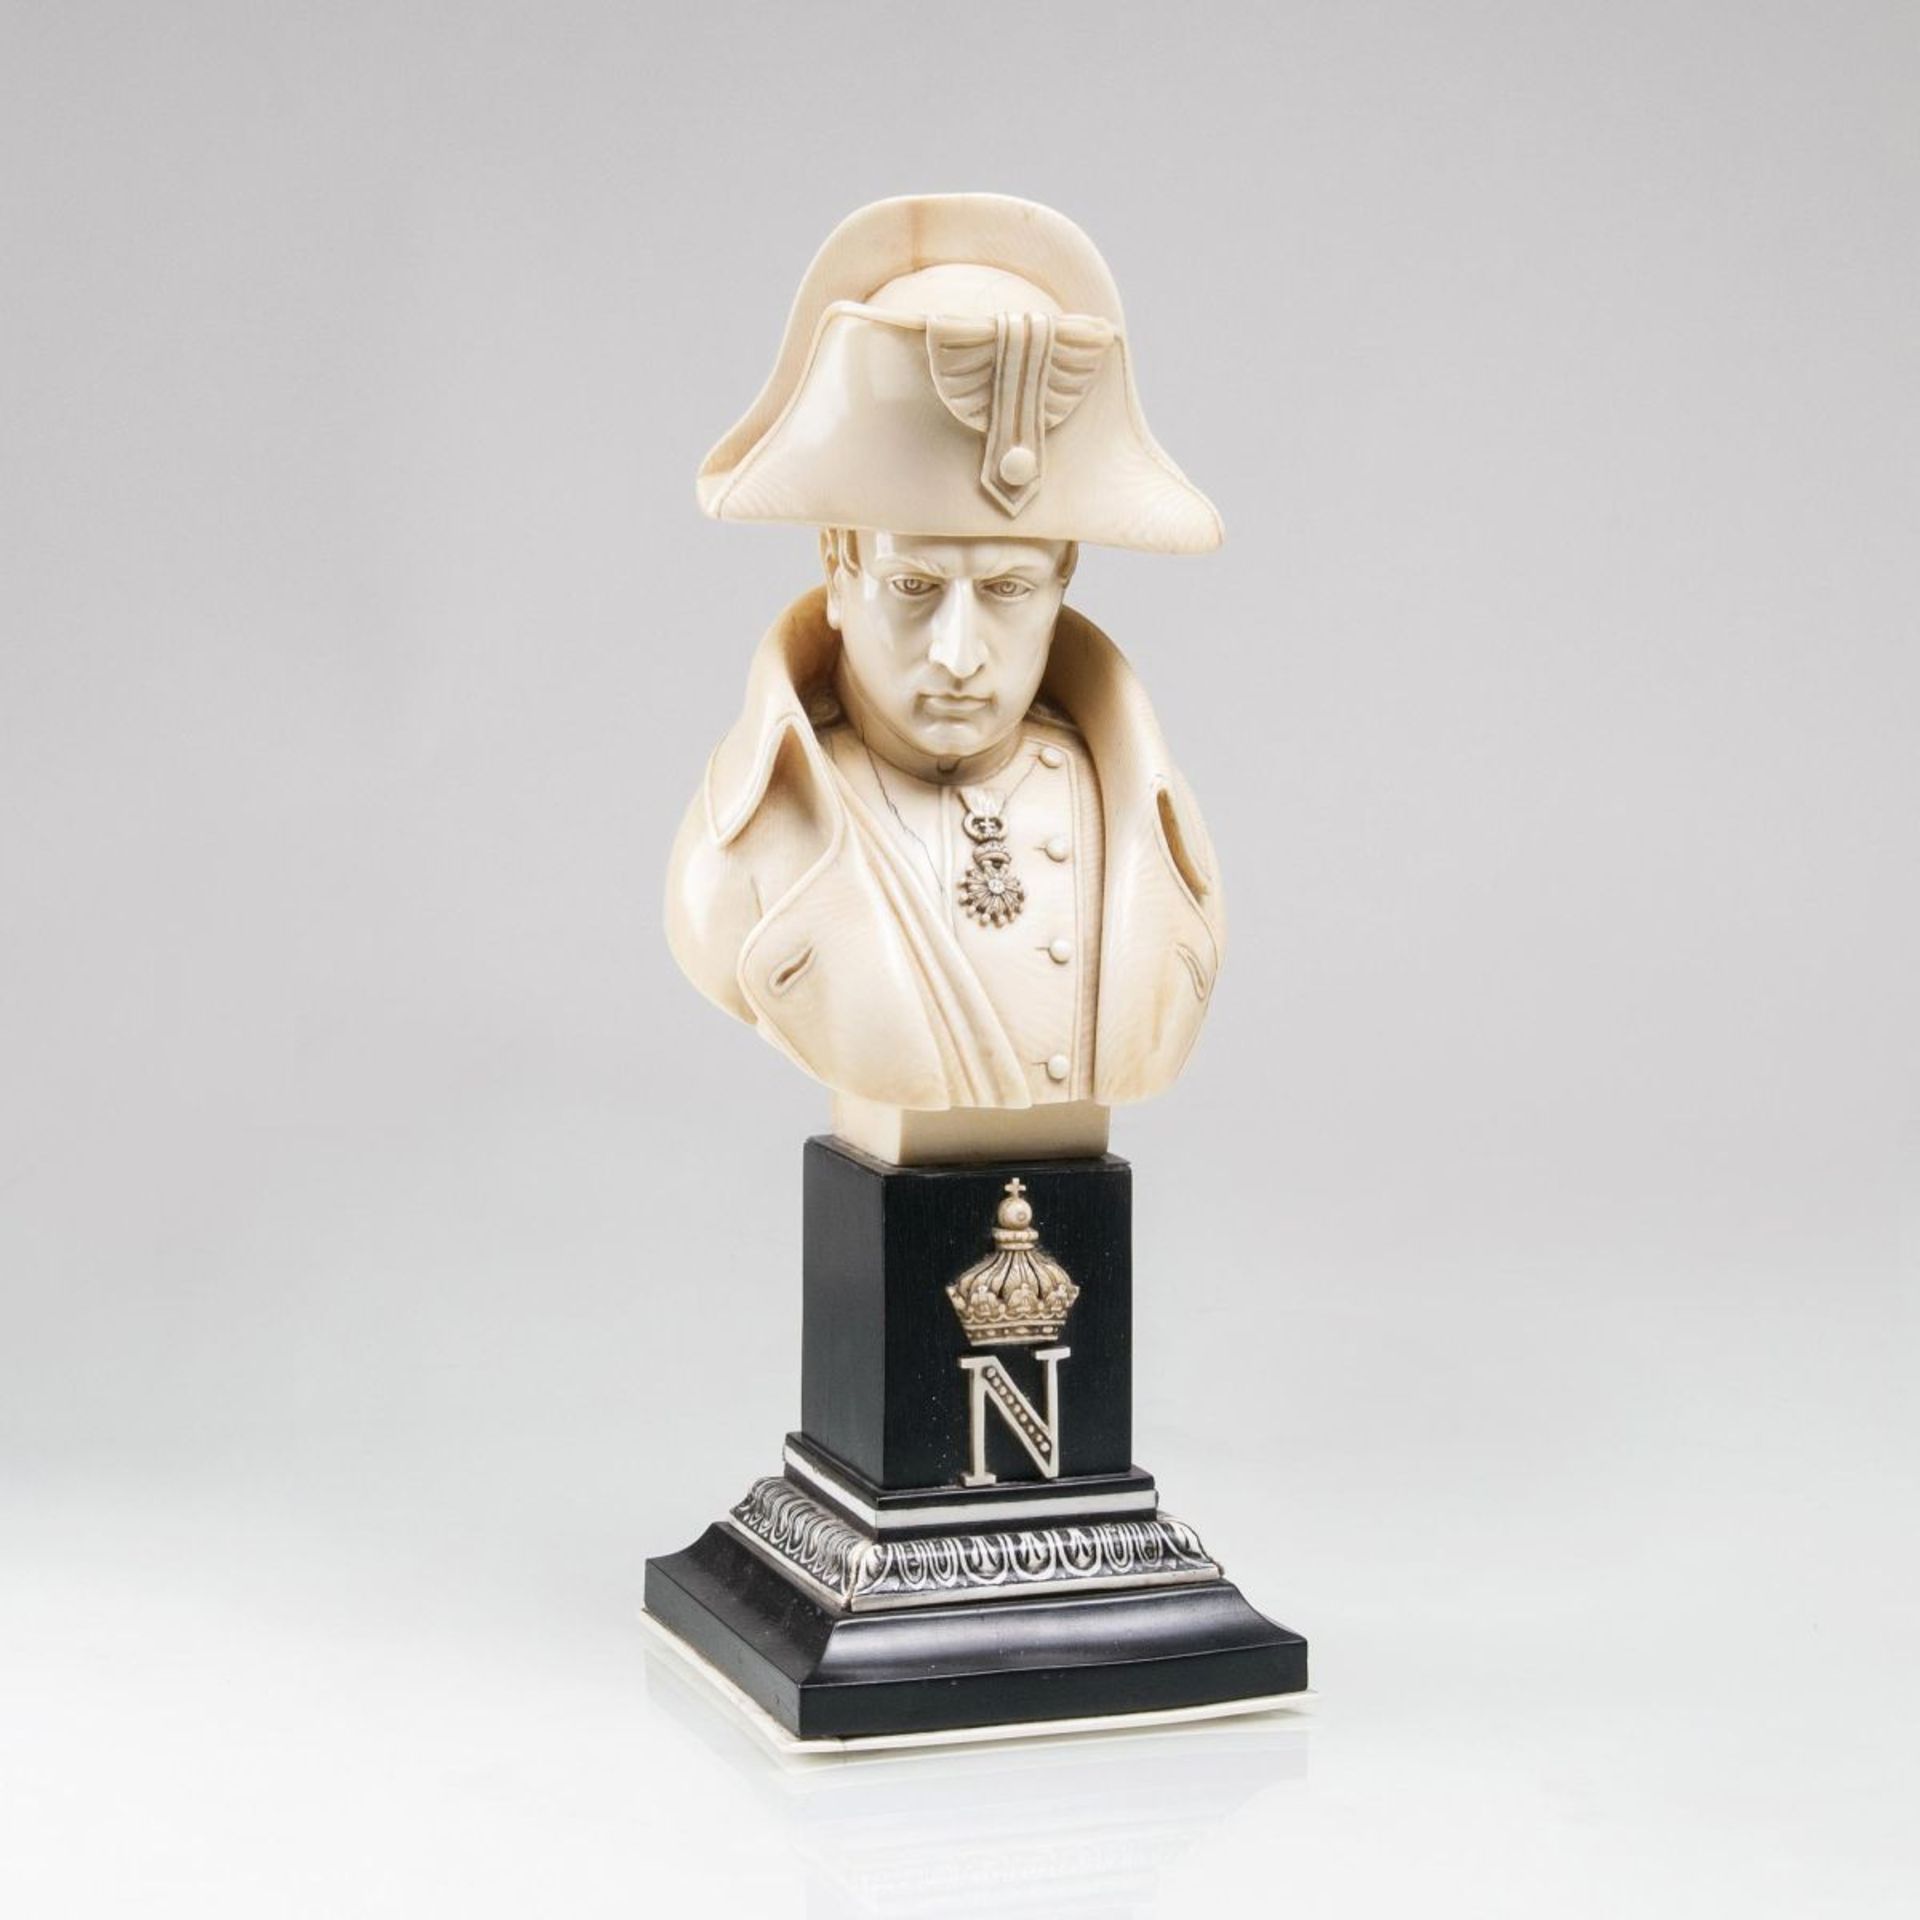 An importante Ivory Bust of Napoléon BonaparteDieppe, around 1840. Fullround carved ivory. The